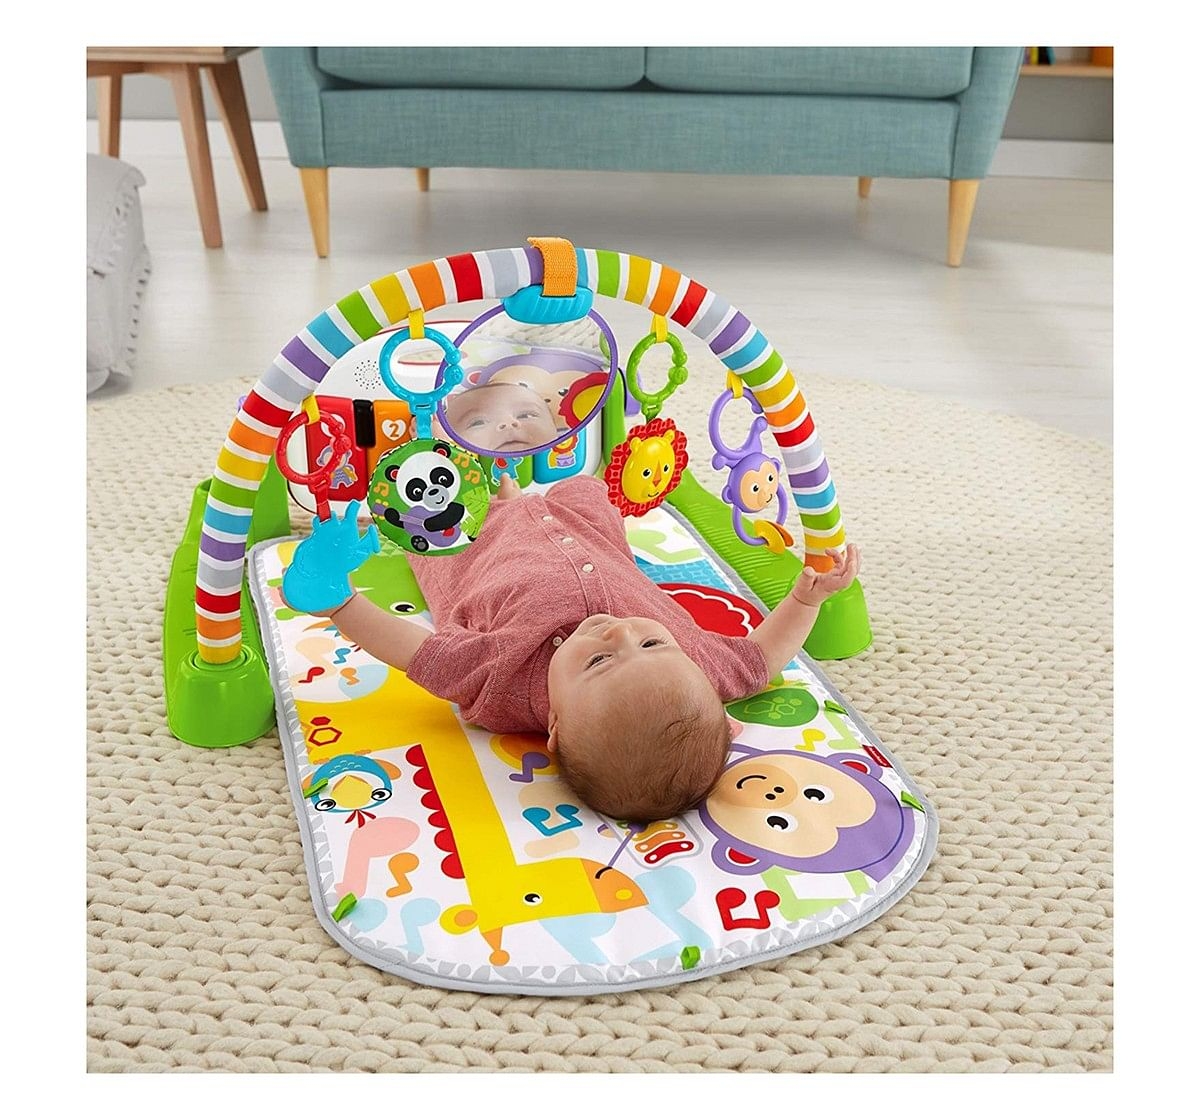 Fisher Price Deluxe Kick And Play Piano Gym Baby Gear for Kids age 6M+ 